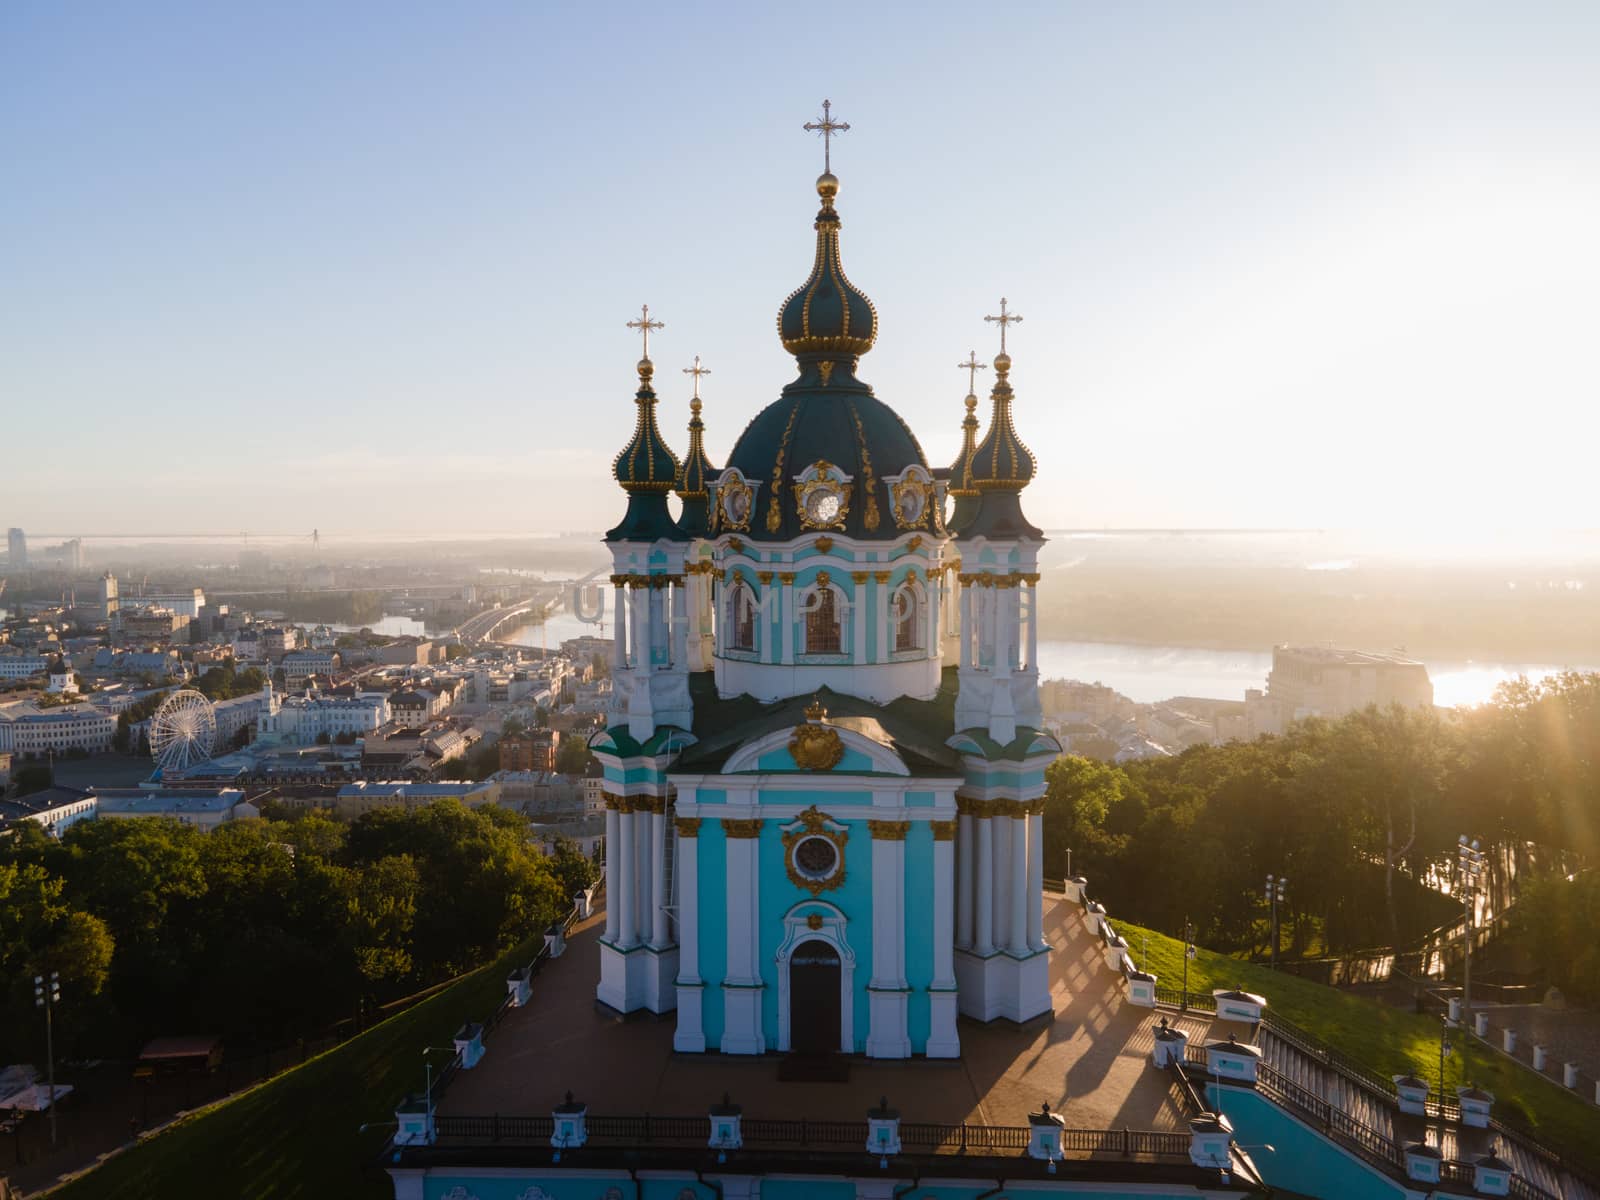 Aerial view of Kyiv St. Andrew's Church.